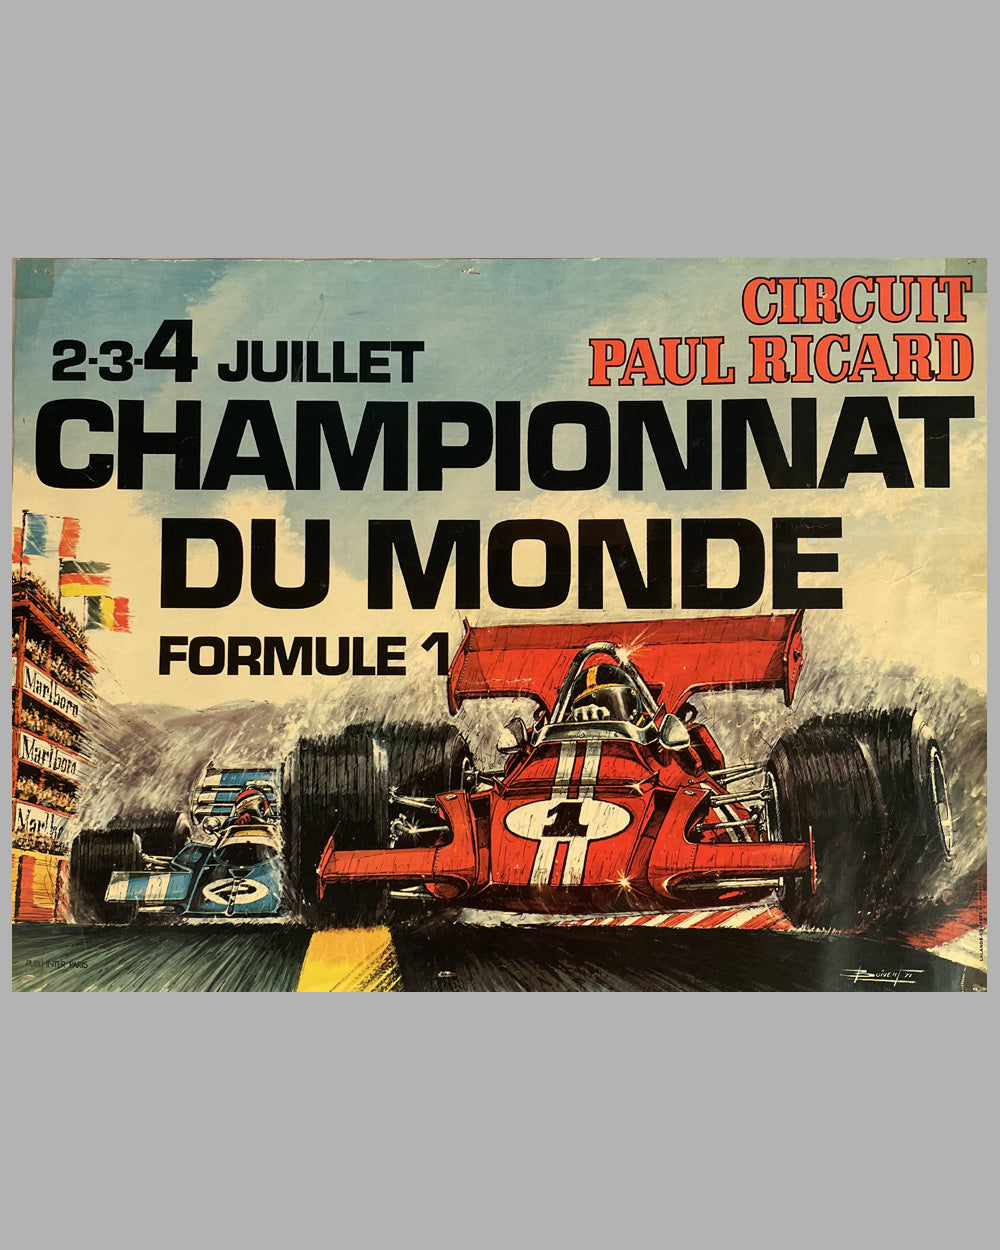 1971 Grand Prix of France original and official poster by Boiven